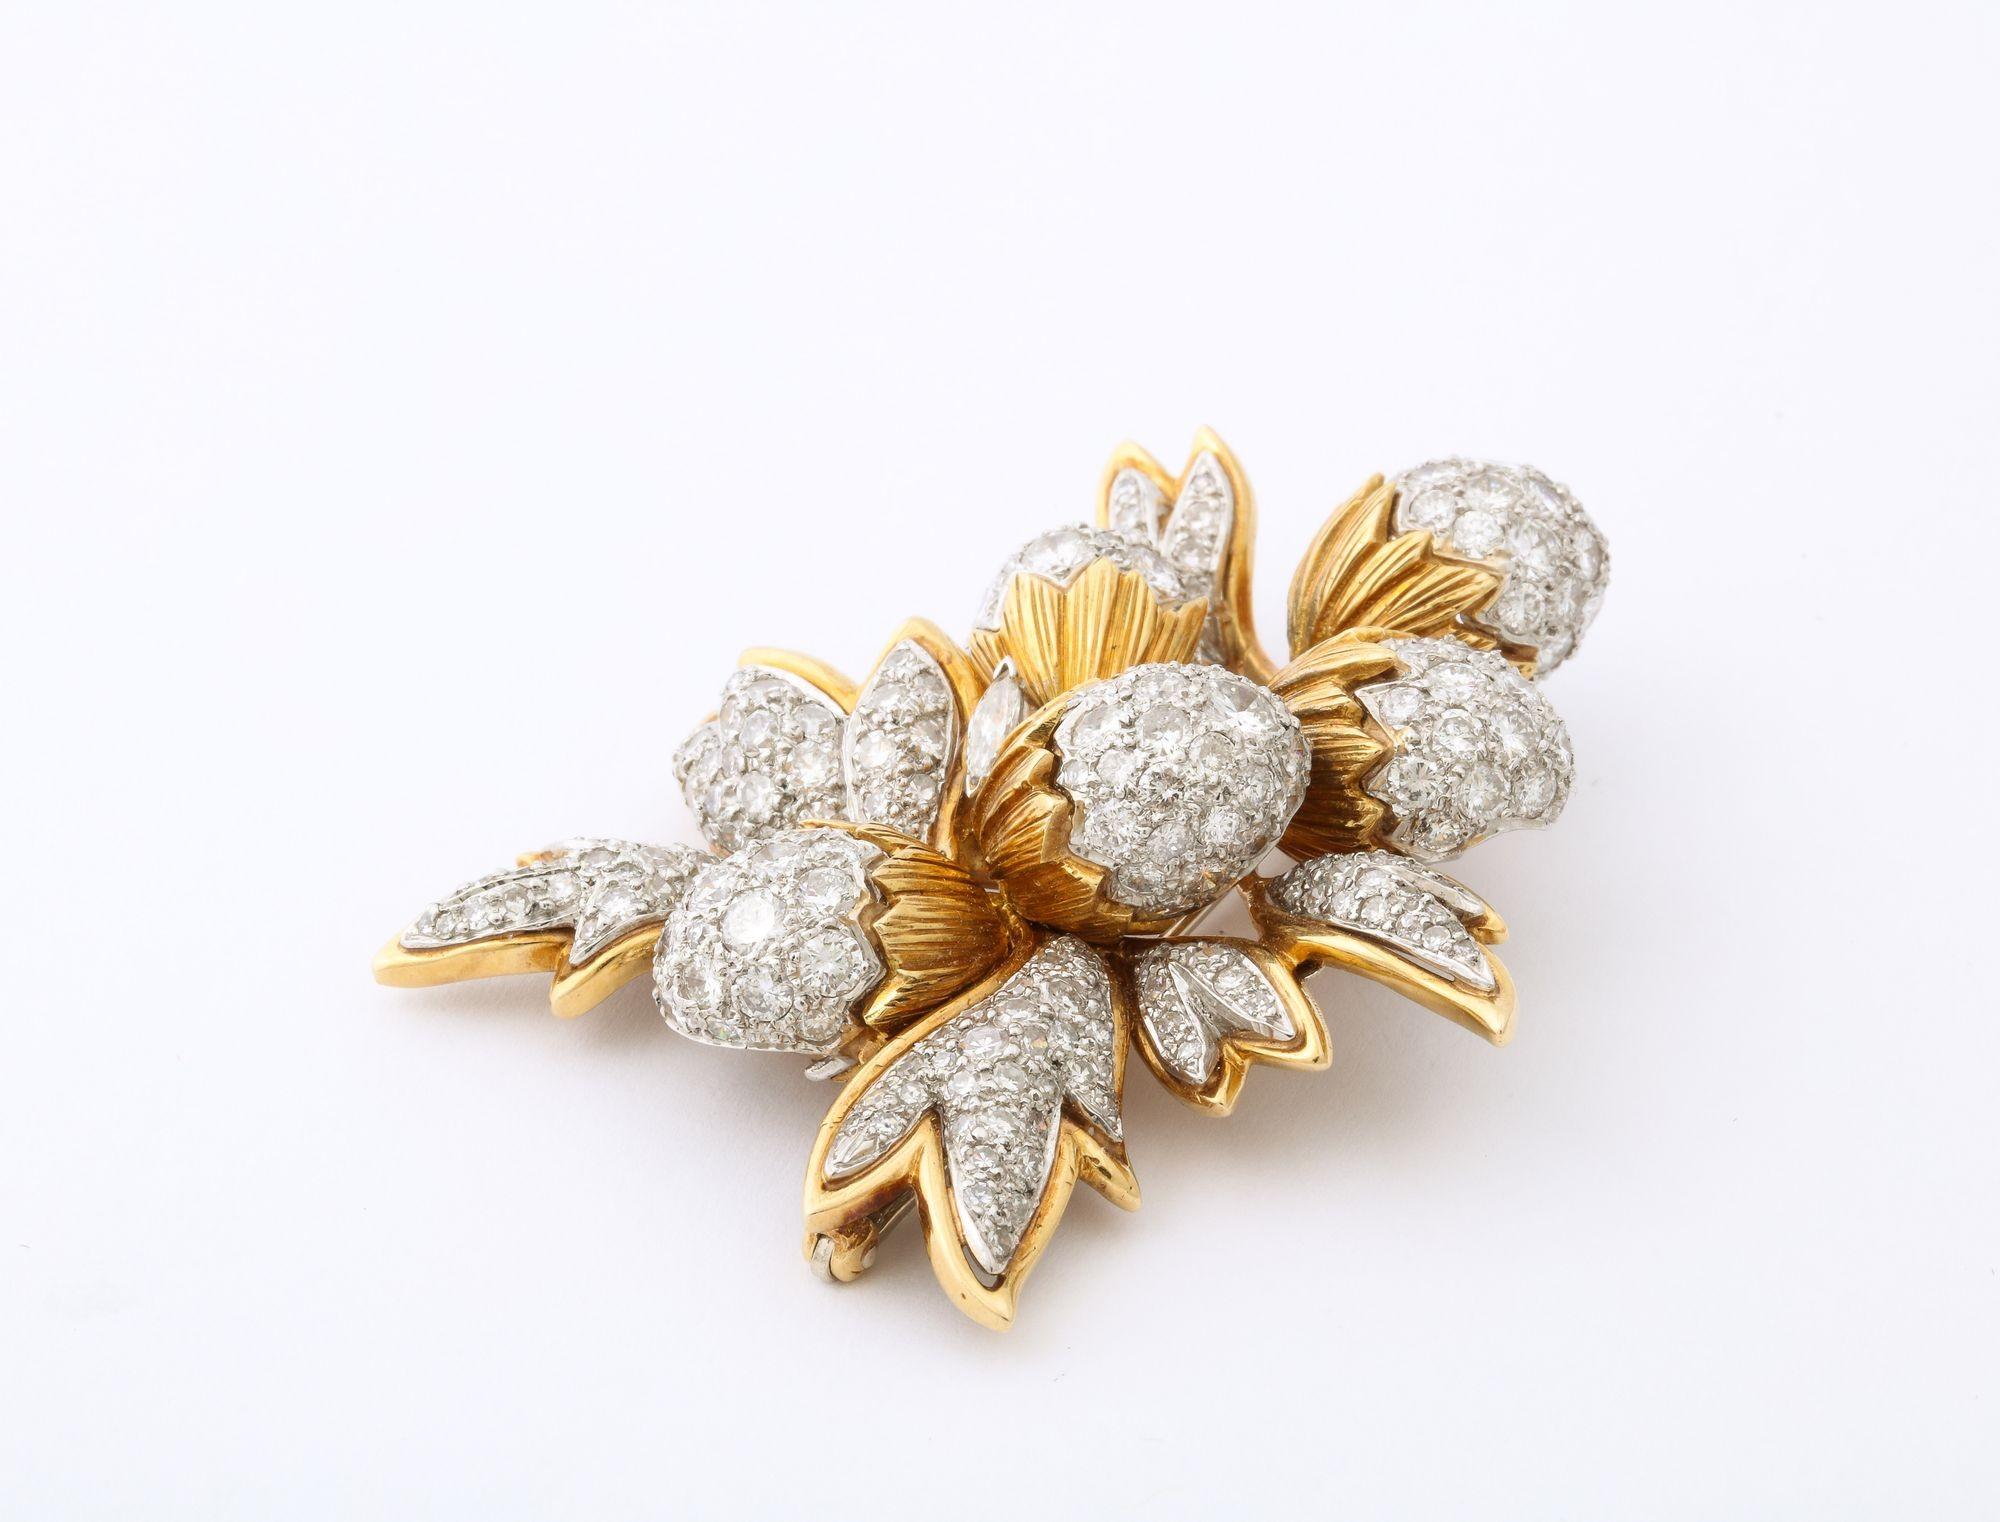 18K Gold and Platinum Brooch with Diamond Acorns and Leaves 3